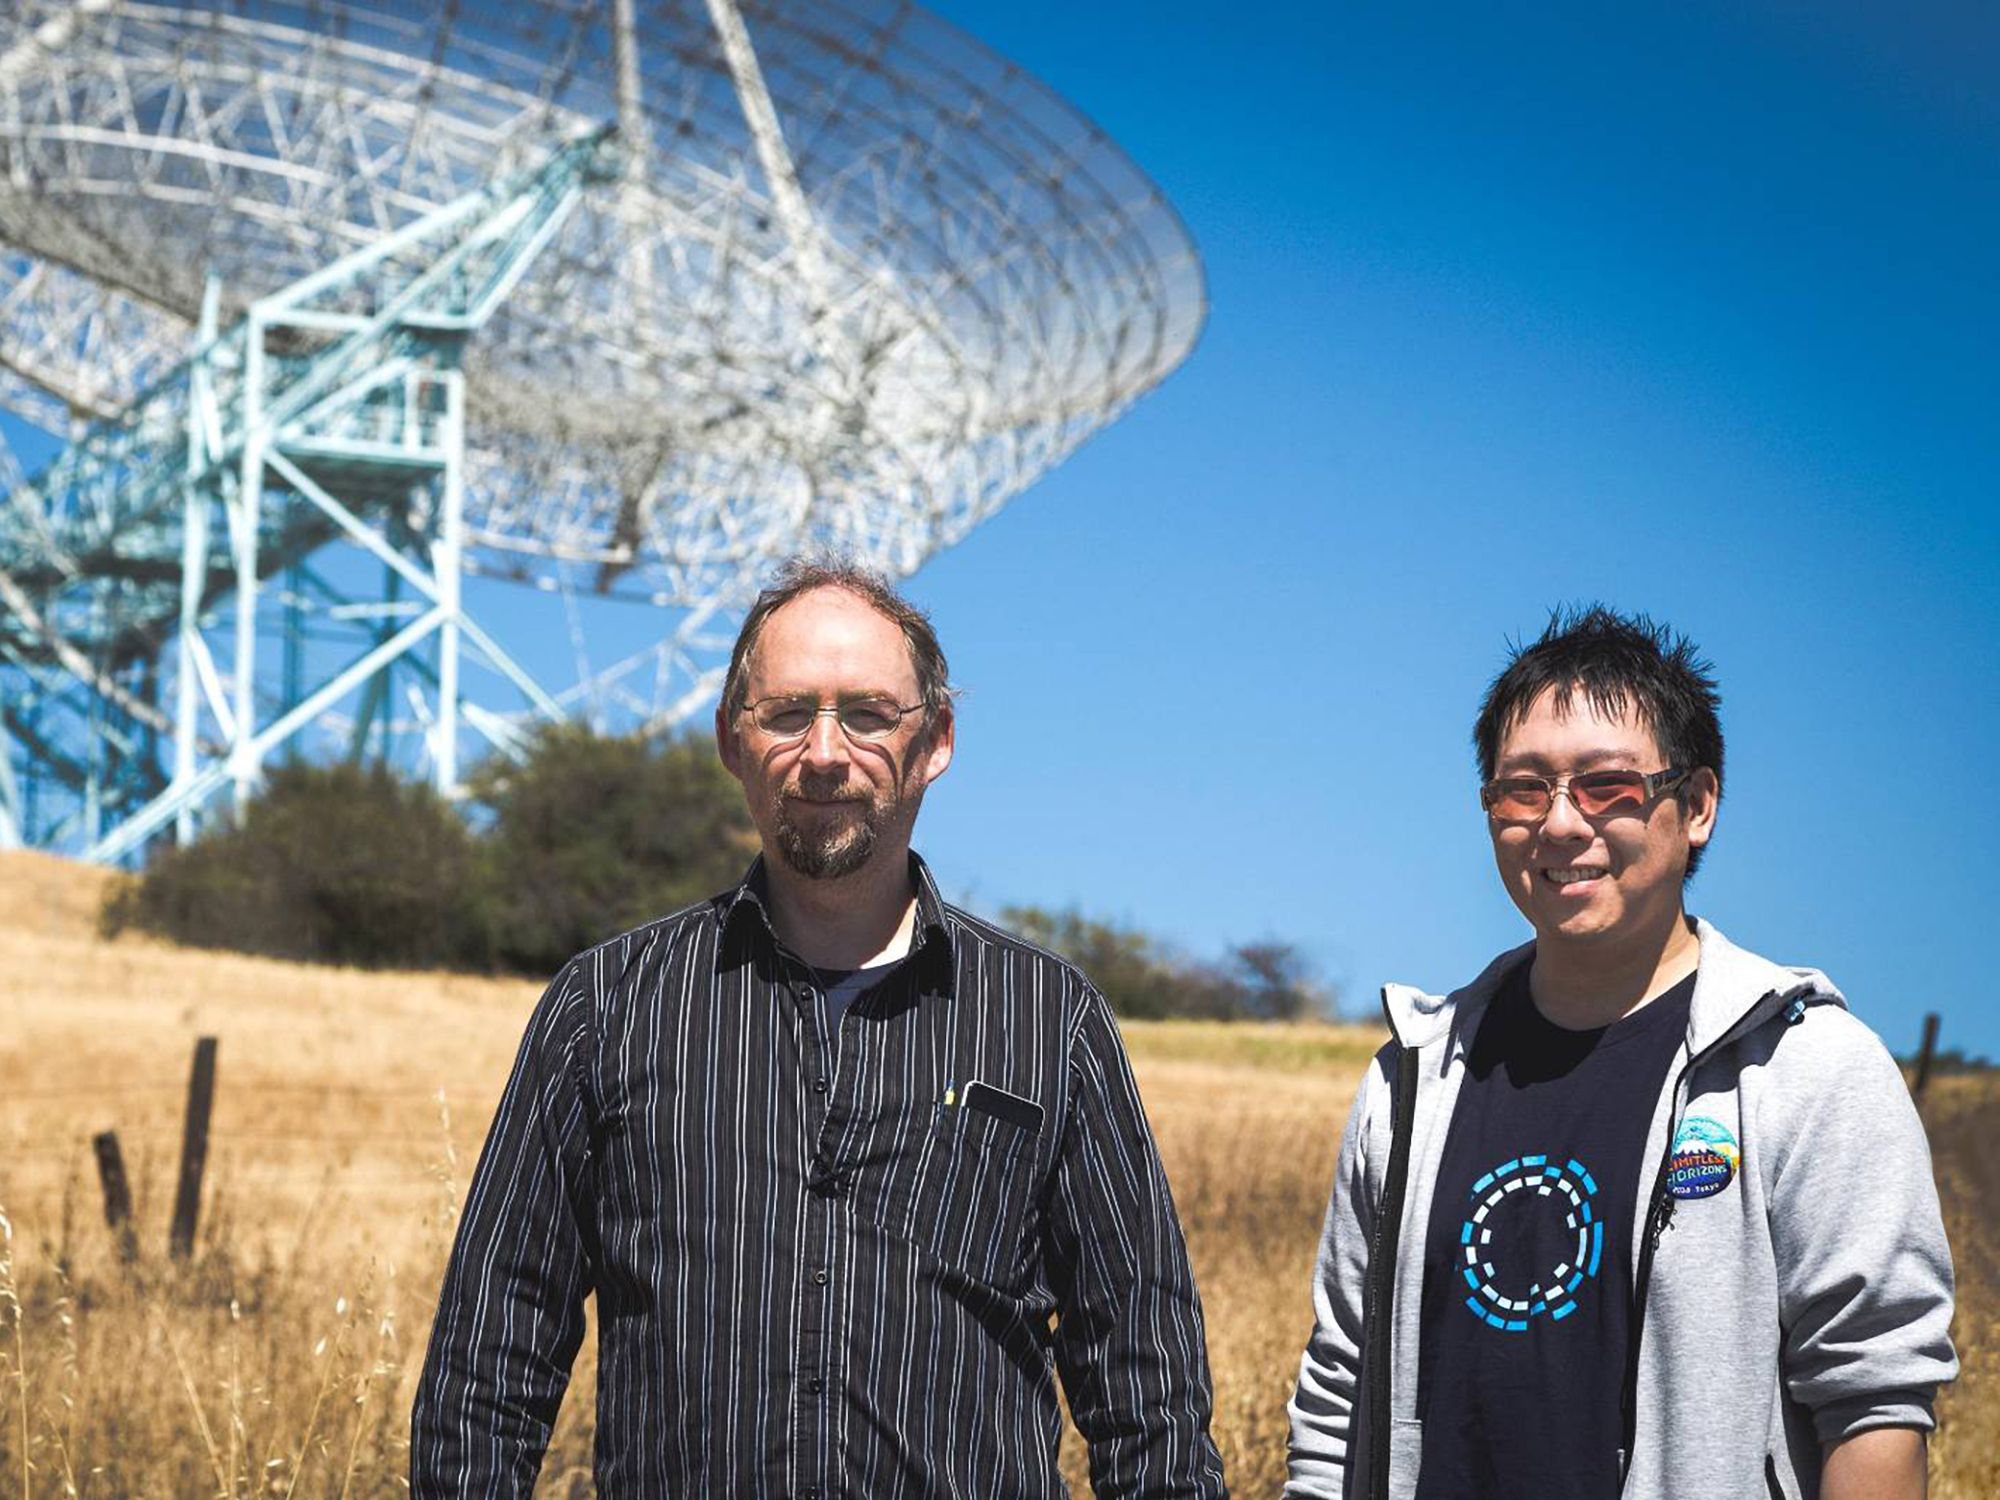 Dr. Adam Back and Samson Mow at the Stanford Satellite Dish